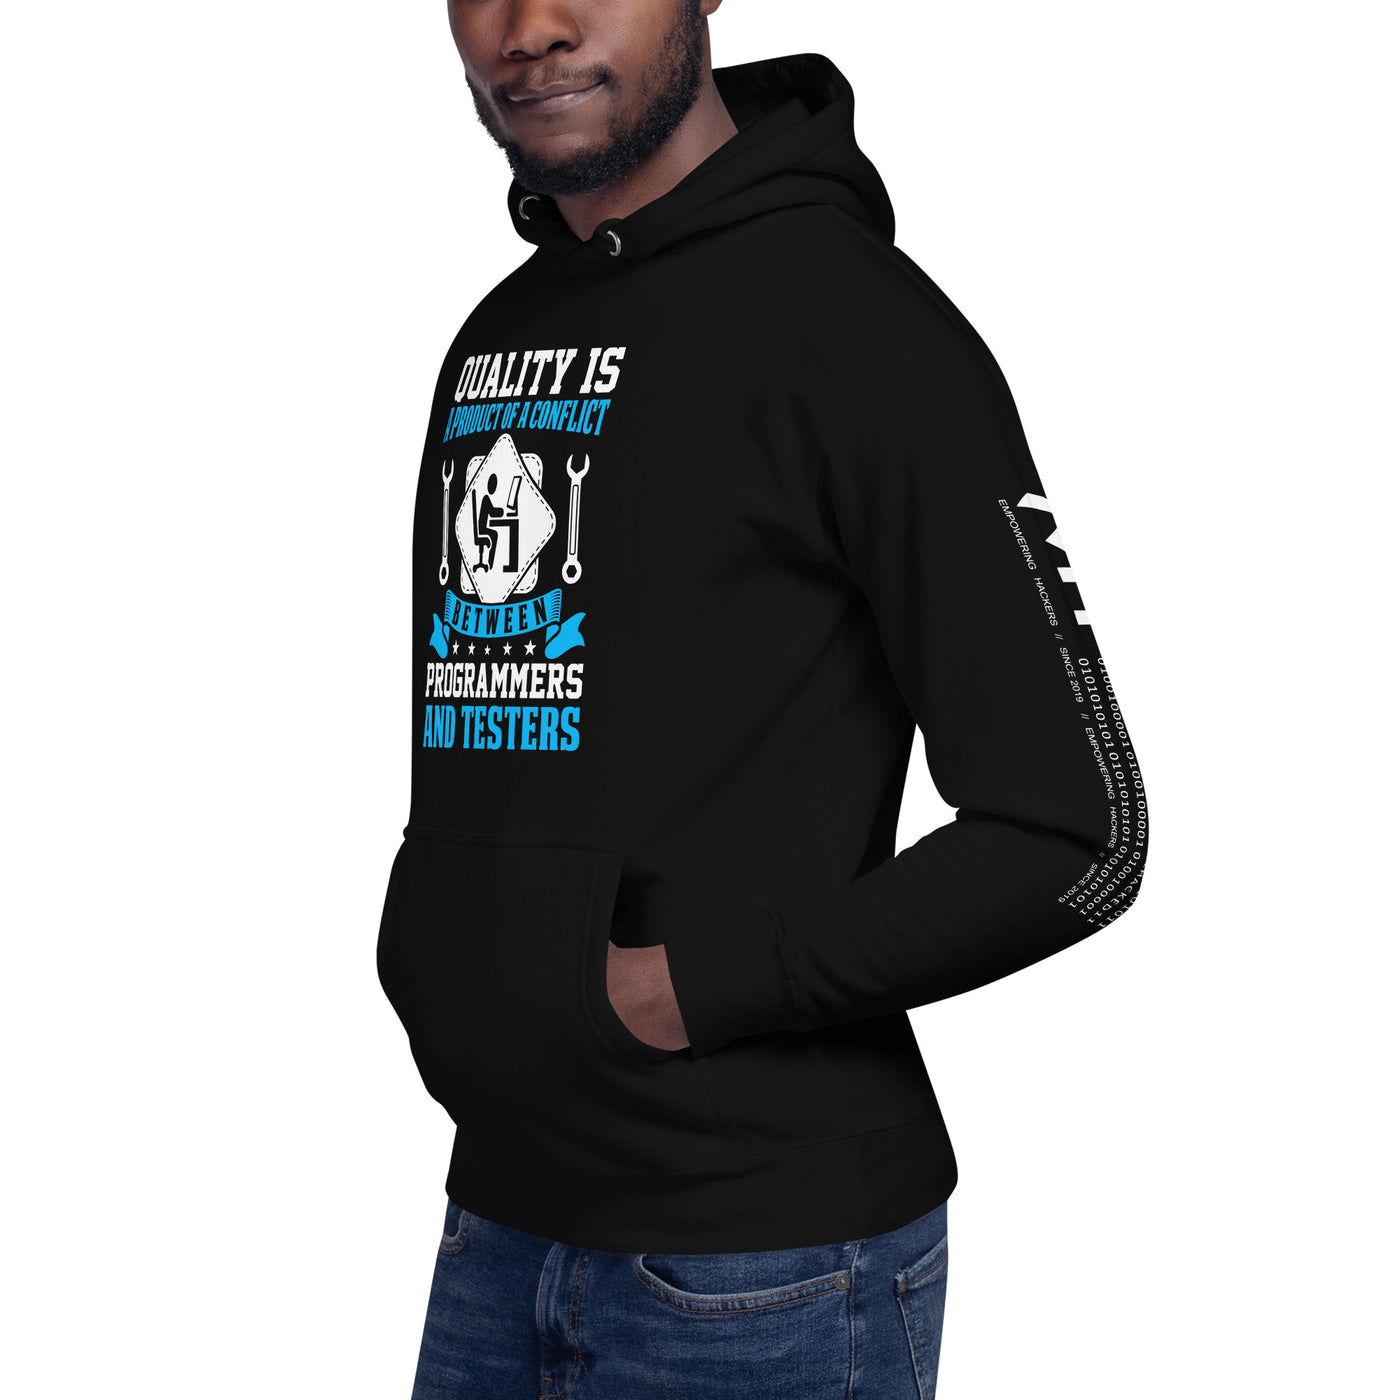 Quality is a Product of a conflict - Unisex Hoodie